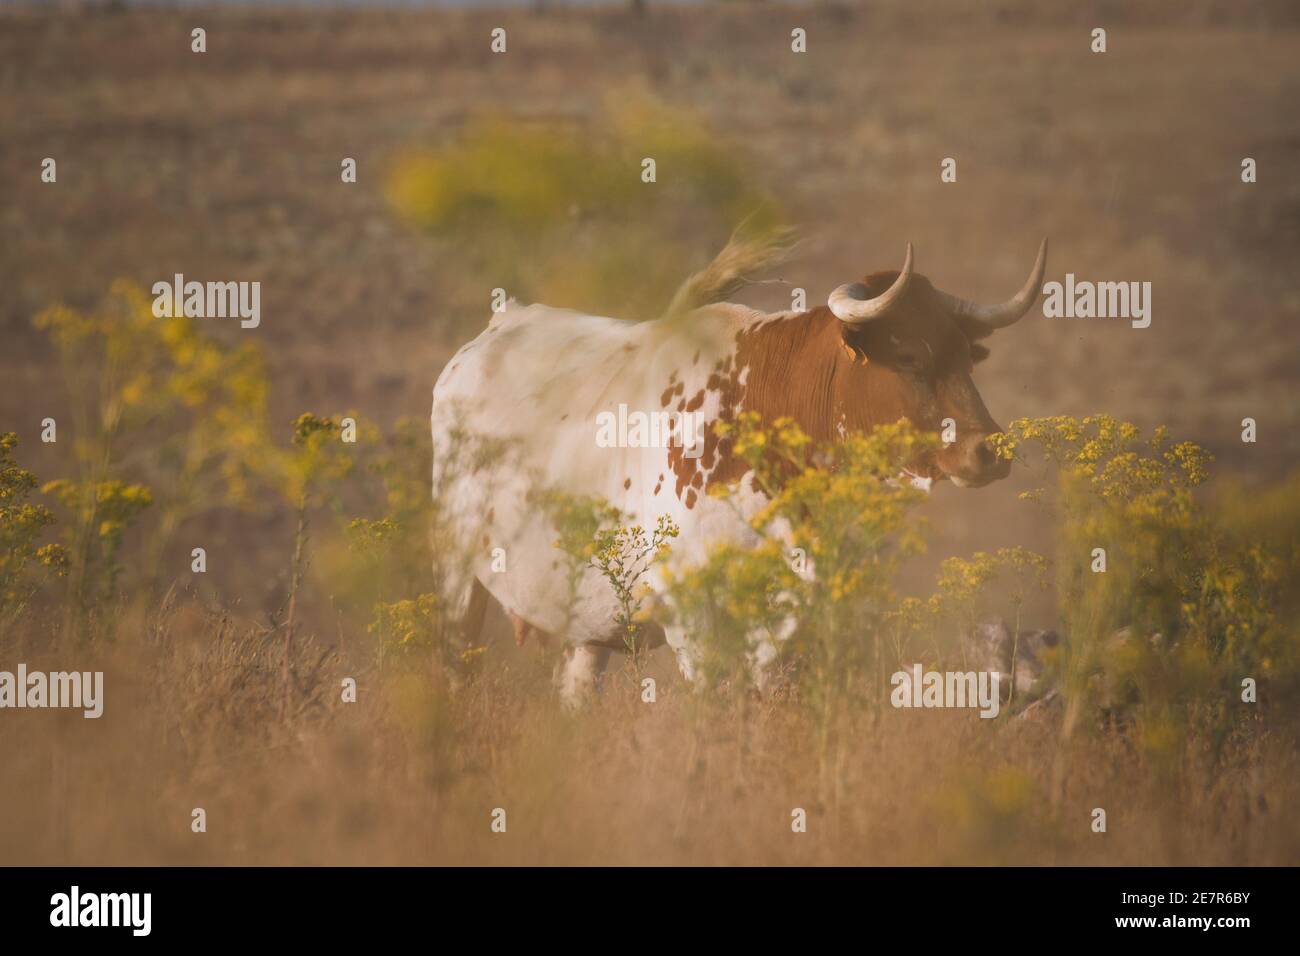 Closeup of a pineywoods cattle in the Spanish Dehesa under the sunlight in Salamanca, Spain Stock Photo